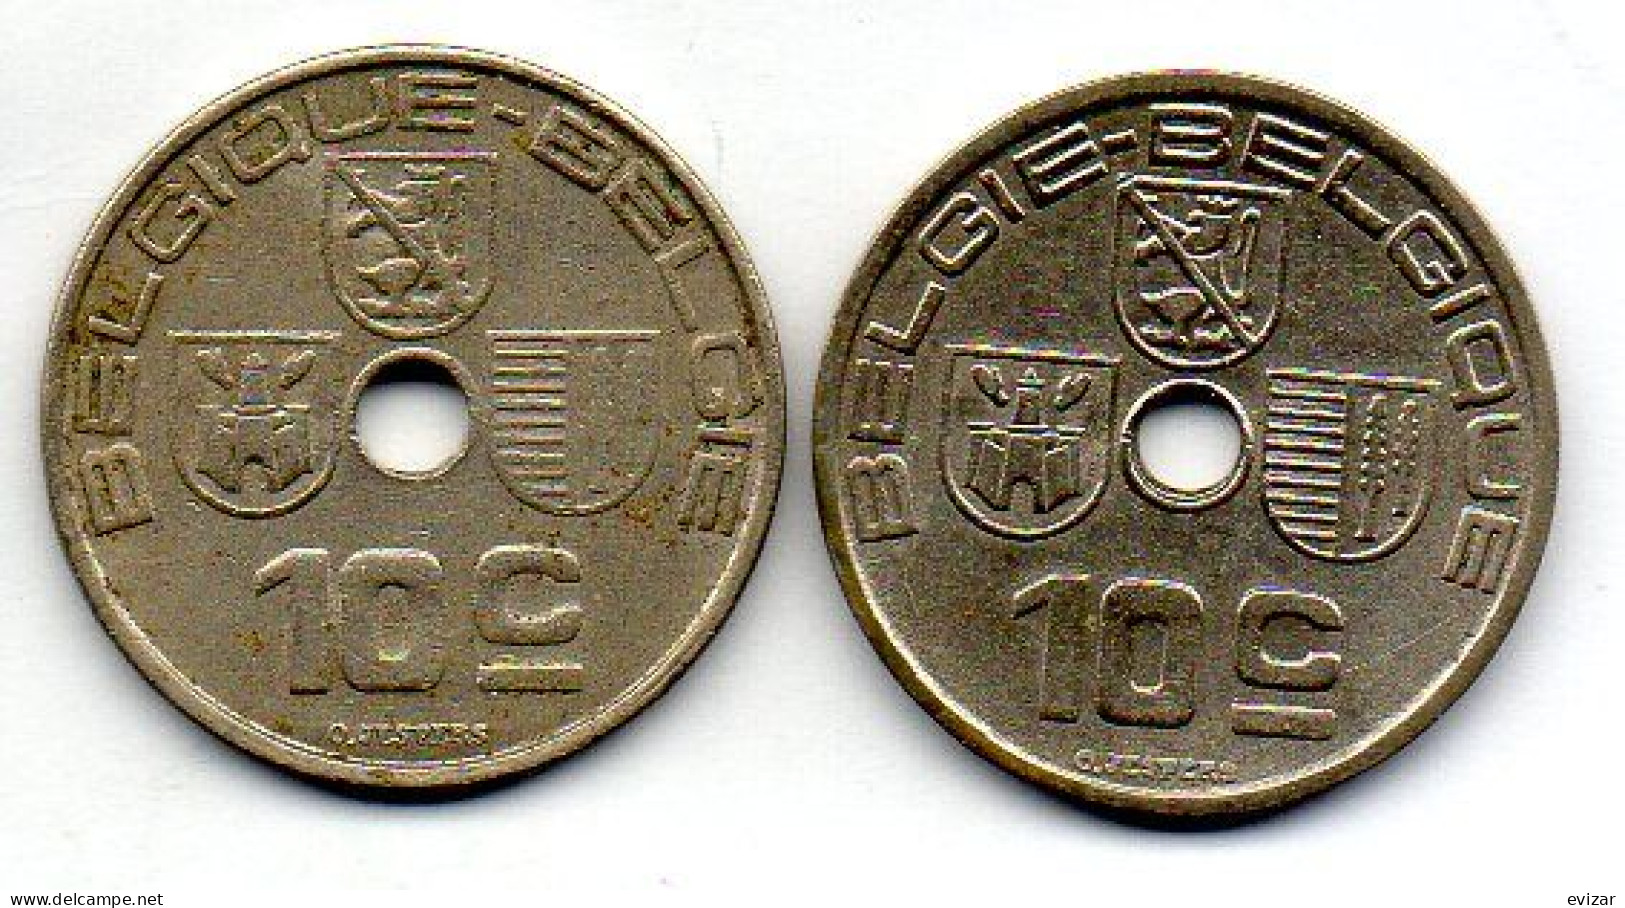 BELGIUM - Set Of Two Coins 10 Centimes, Nickel-Brass, Year 1938, 1939, KM # 112, 113.1, French & Dutch Legend - 10 Centimes